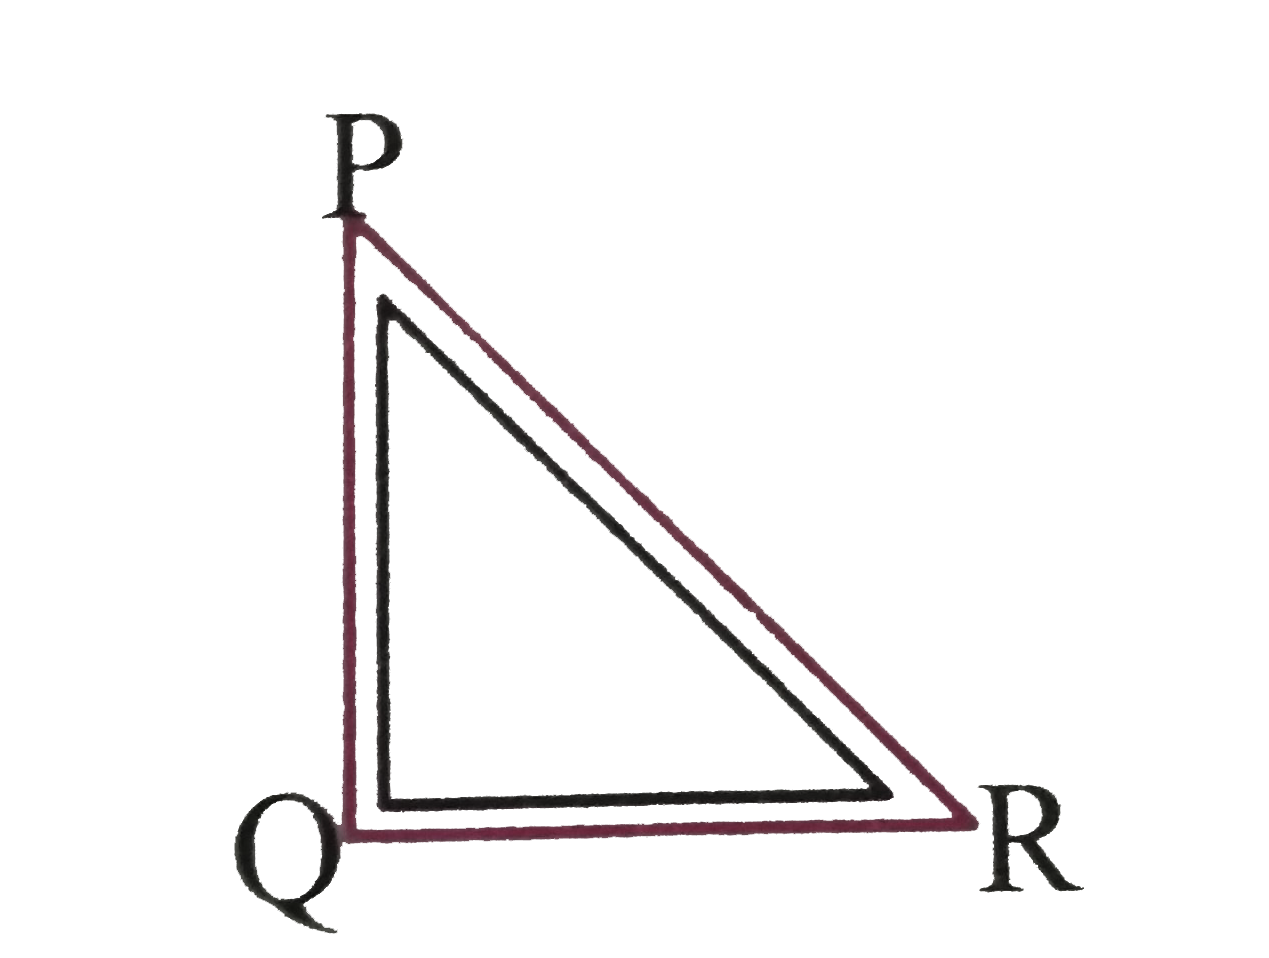 PQR is a right angled triangle made of brass rod bent as shown. If it is heated to a high temperature the angle PQR.